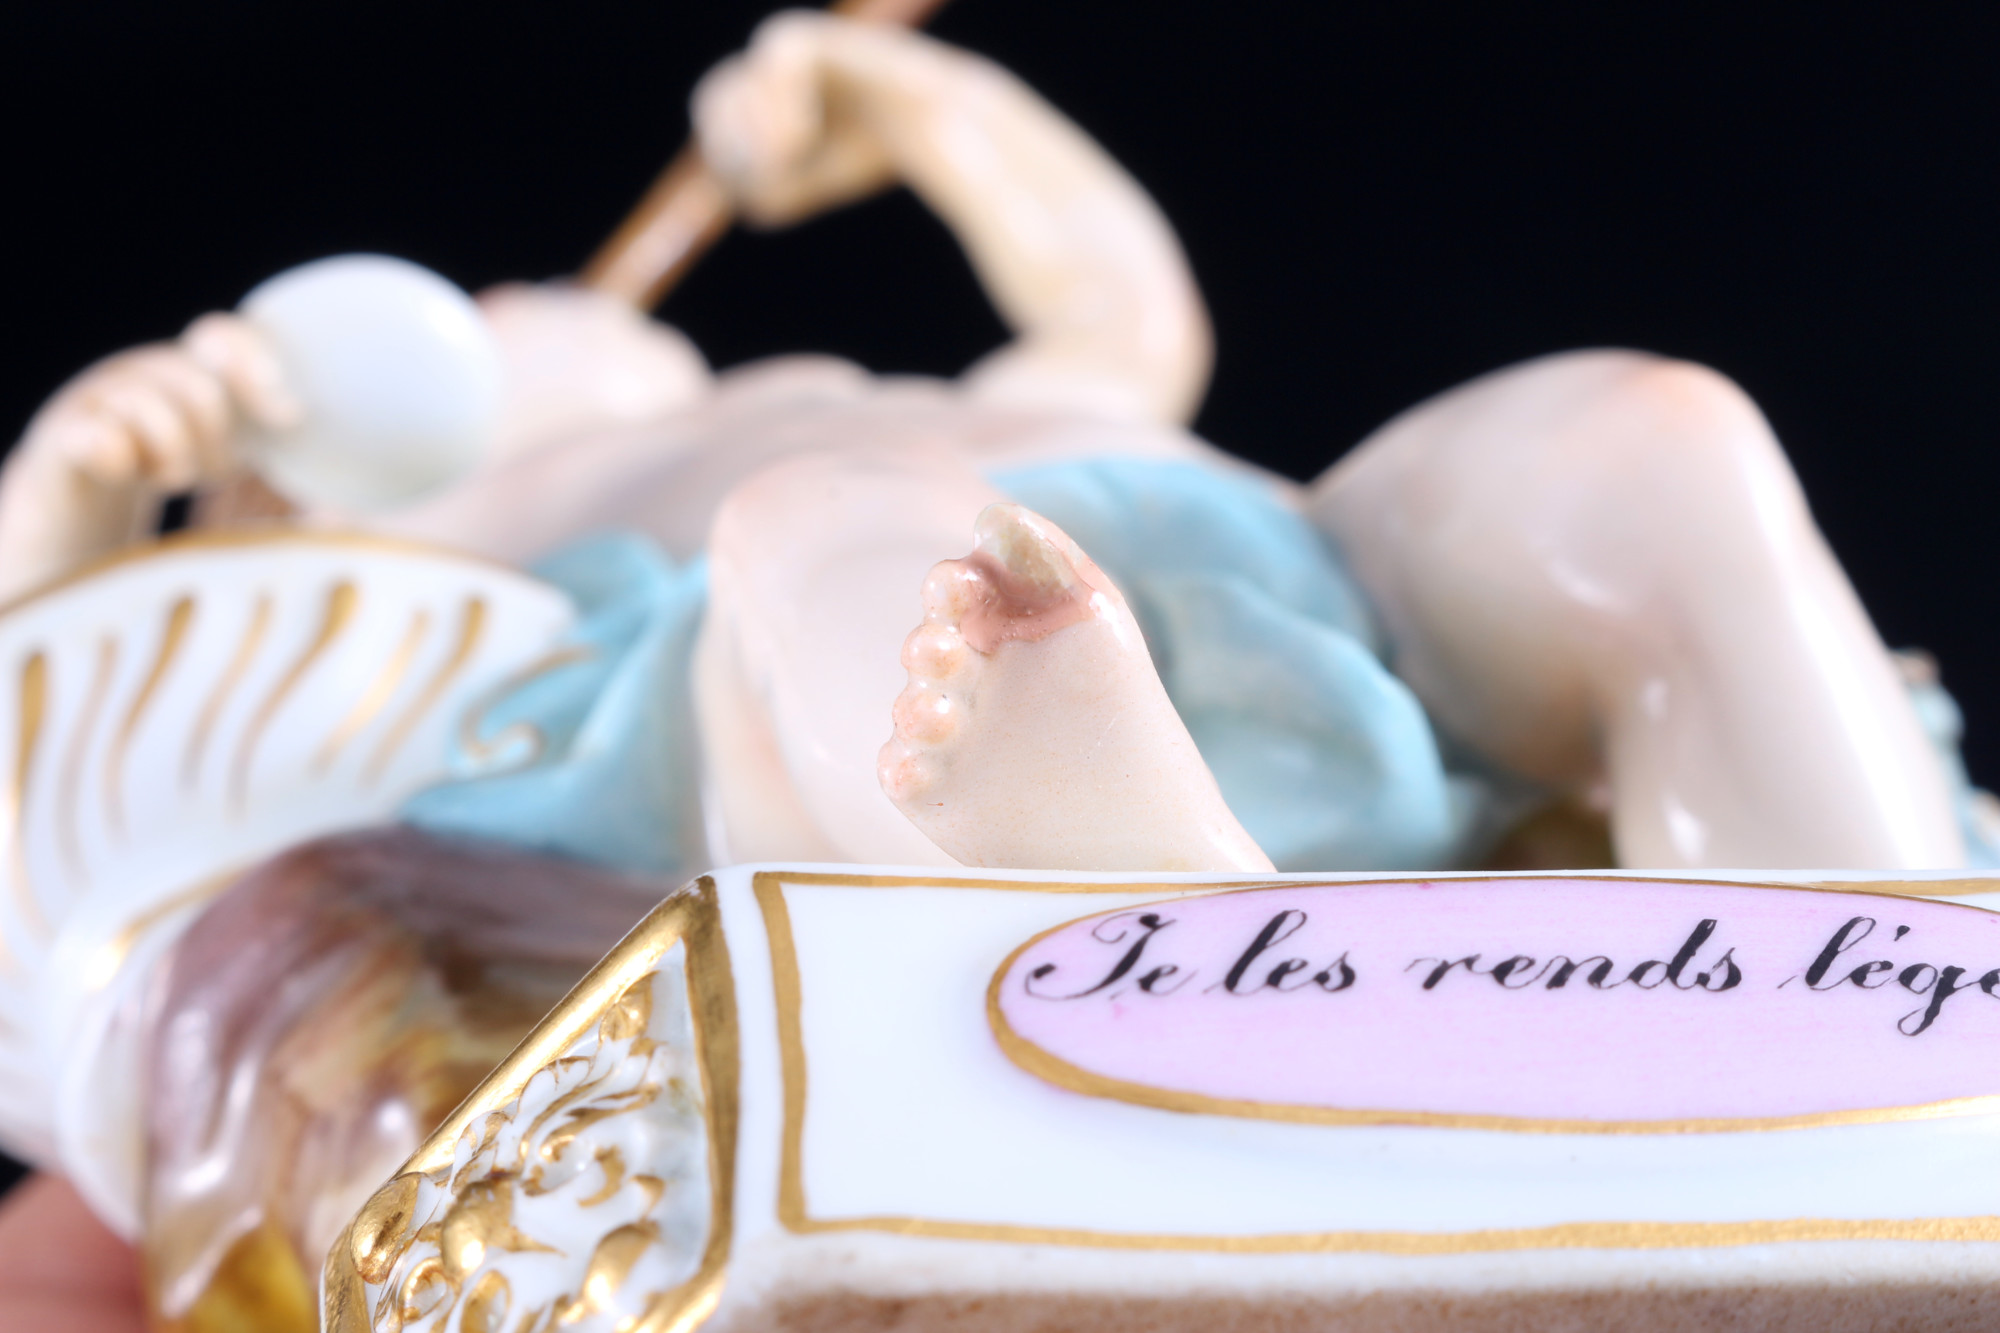 Meissen Devisenkind "Je les rends legers" 1.Wahl, knob mark, cupid with horn 1st choice, - Image 7 of 8